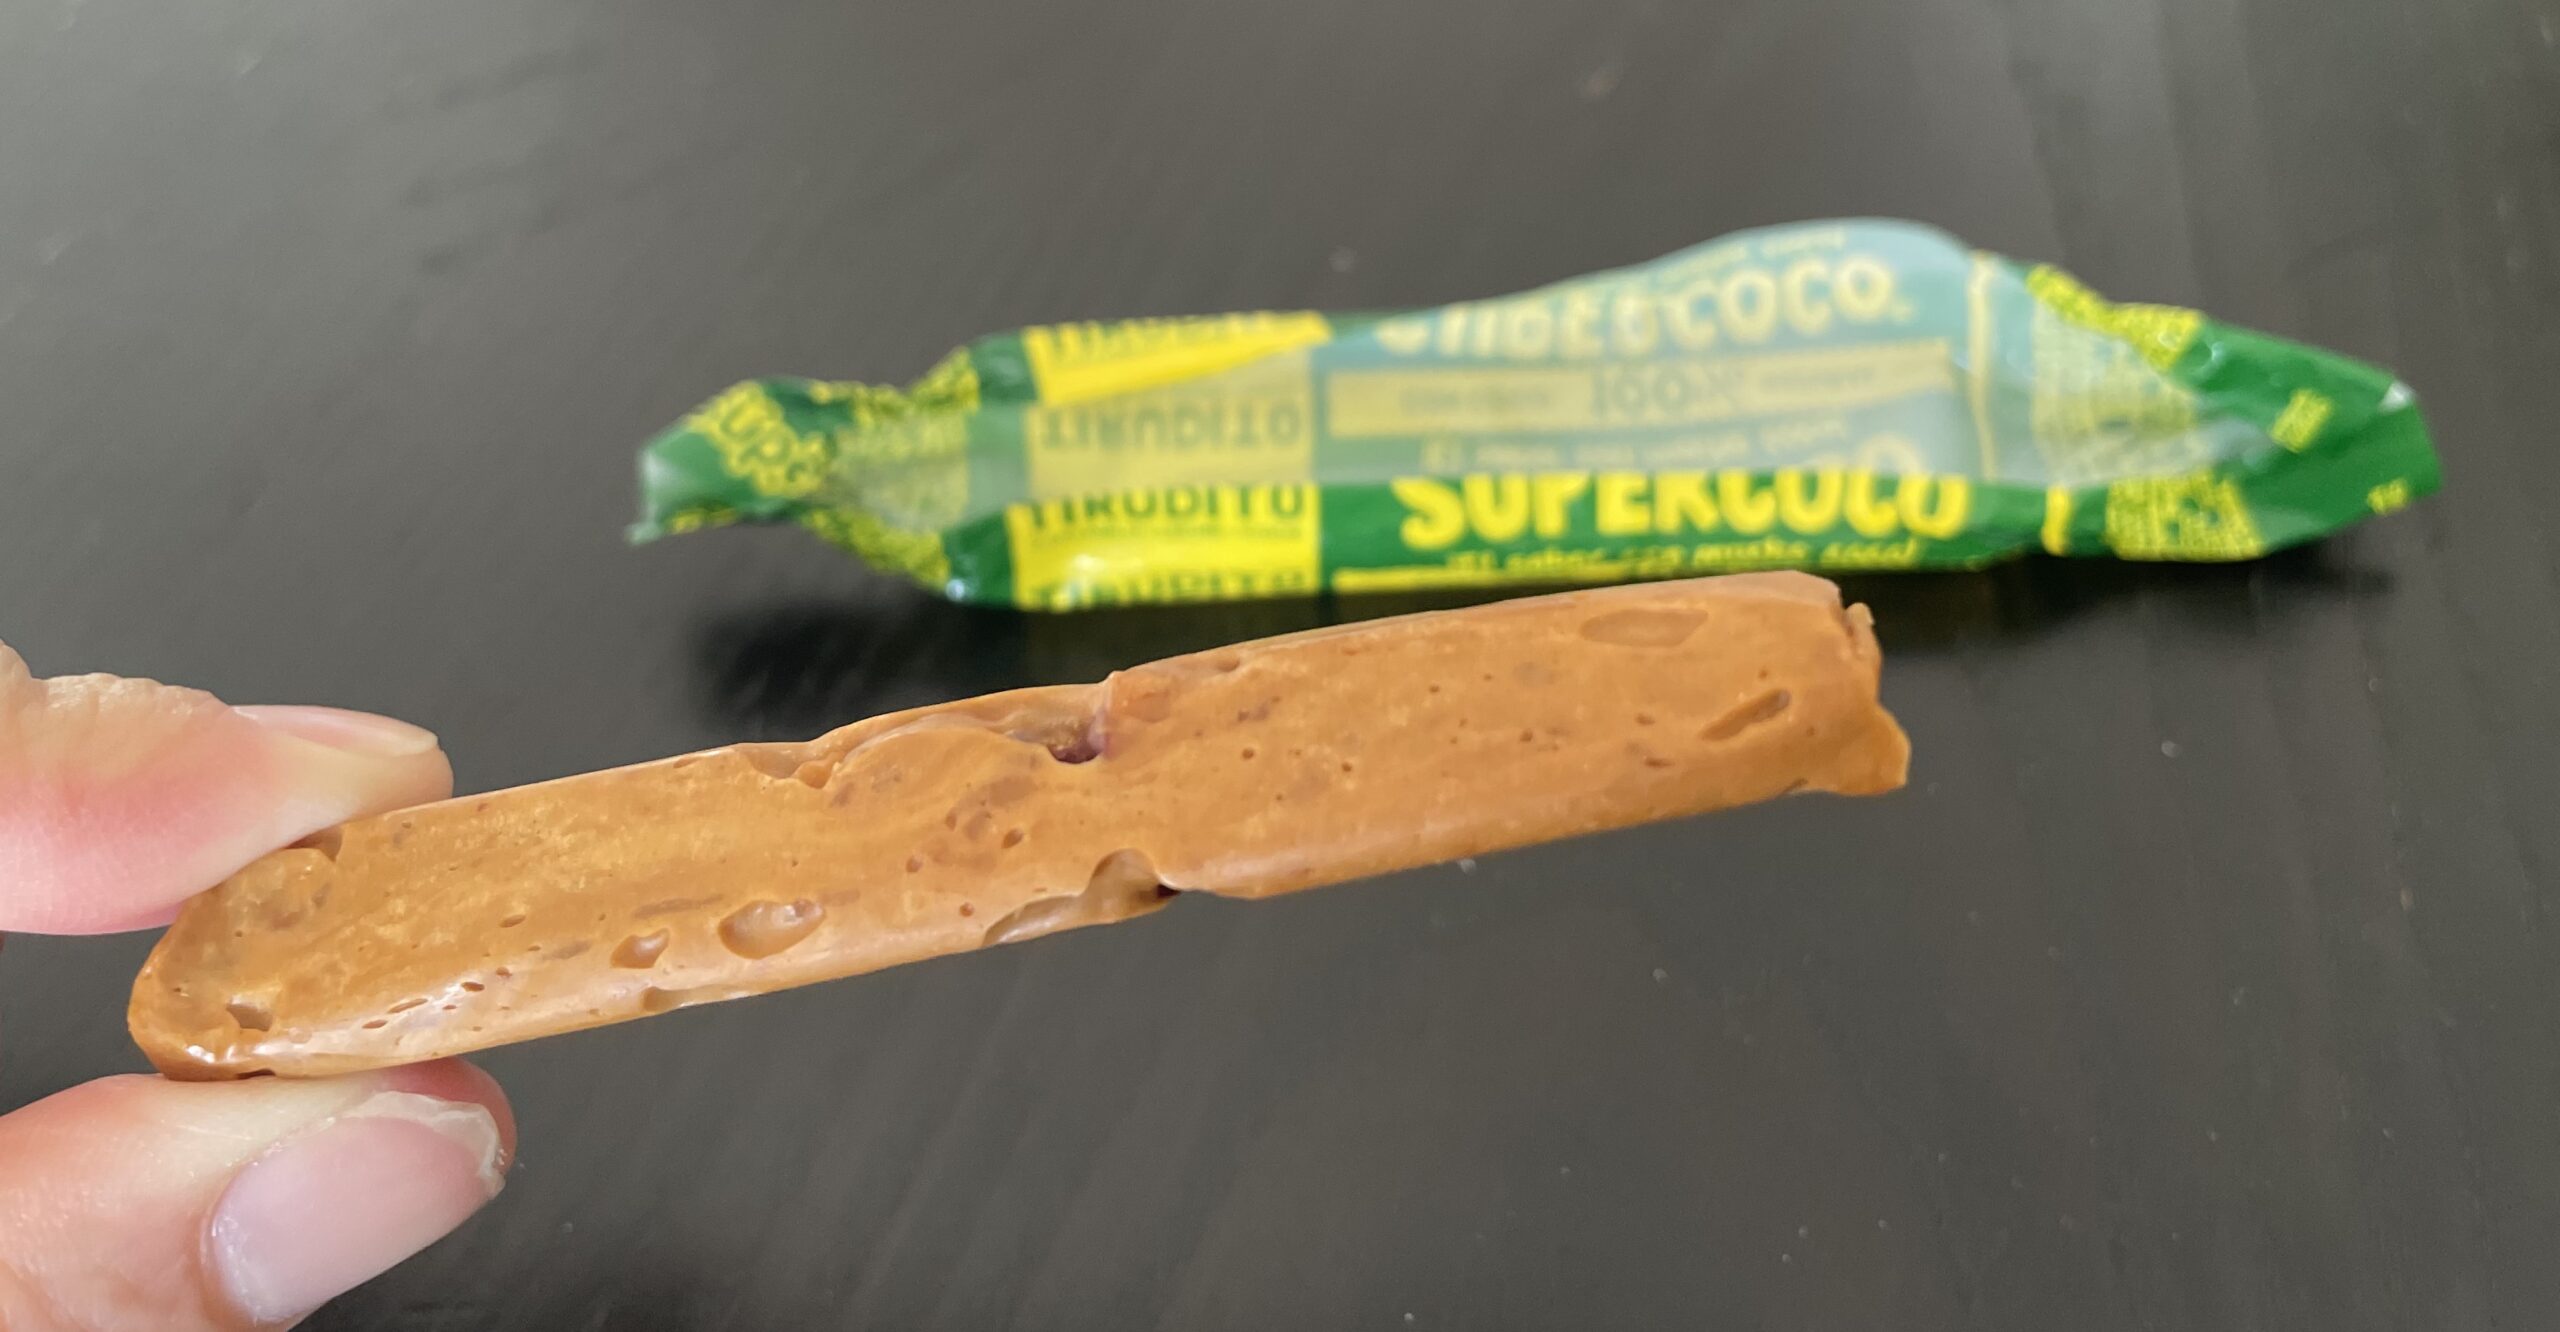 Supercoco turron outside of the package